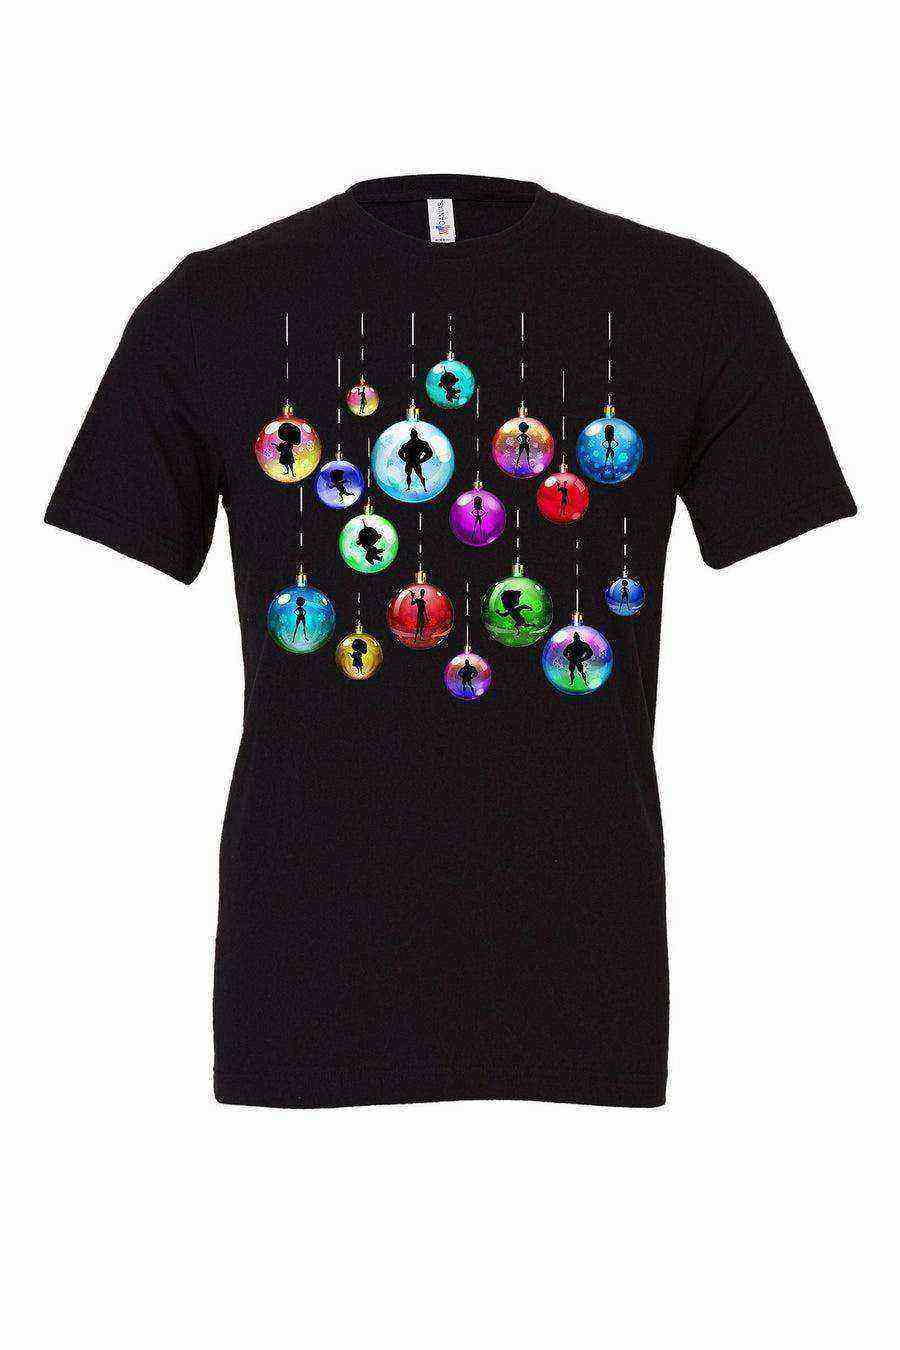 Toddler | Incredibles Ornaments Shirt | Christmas In - Dylan's Tees